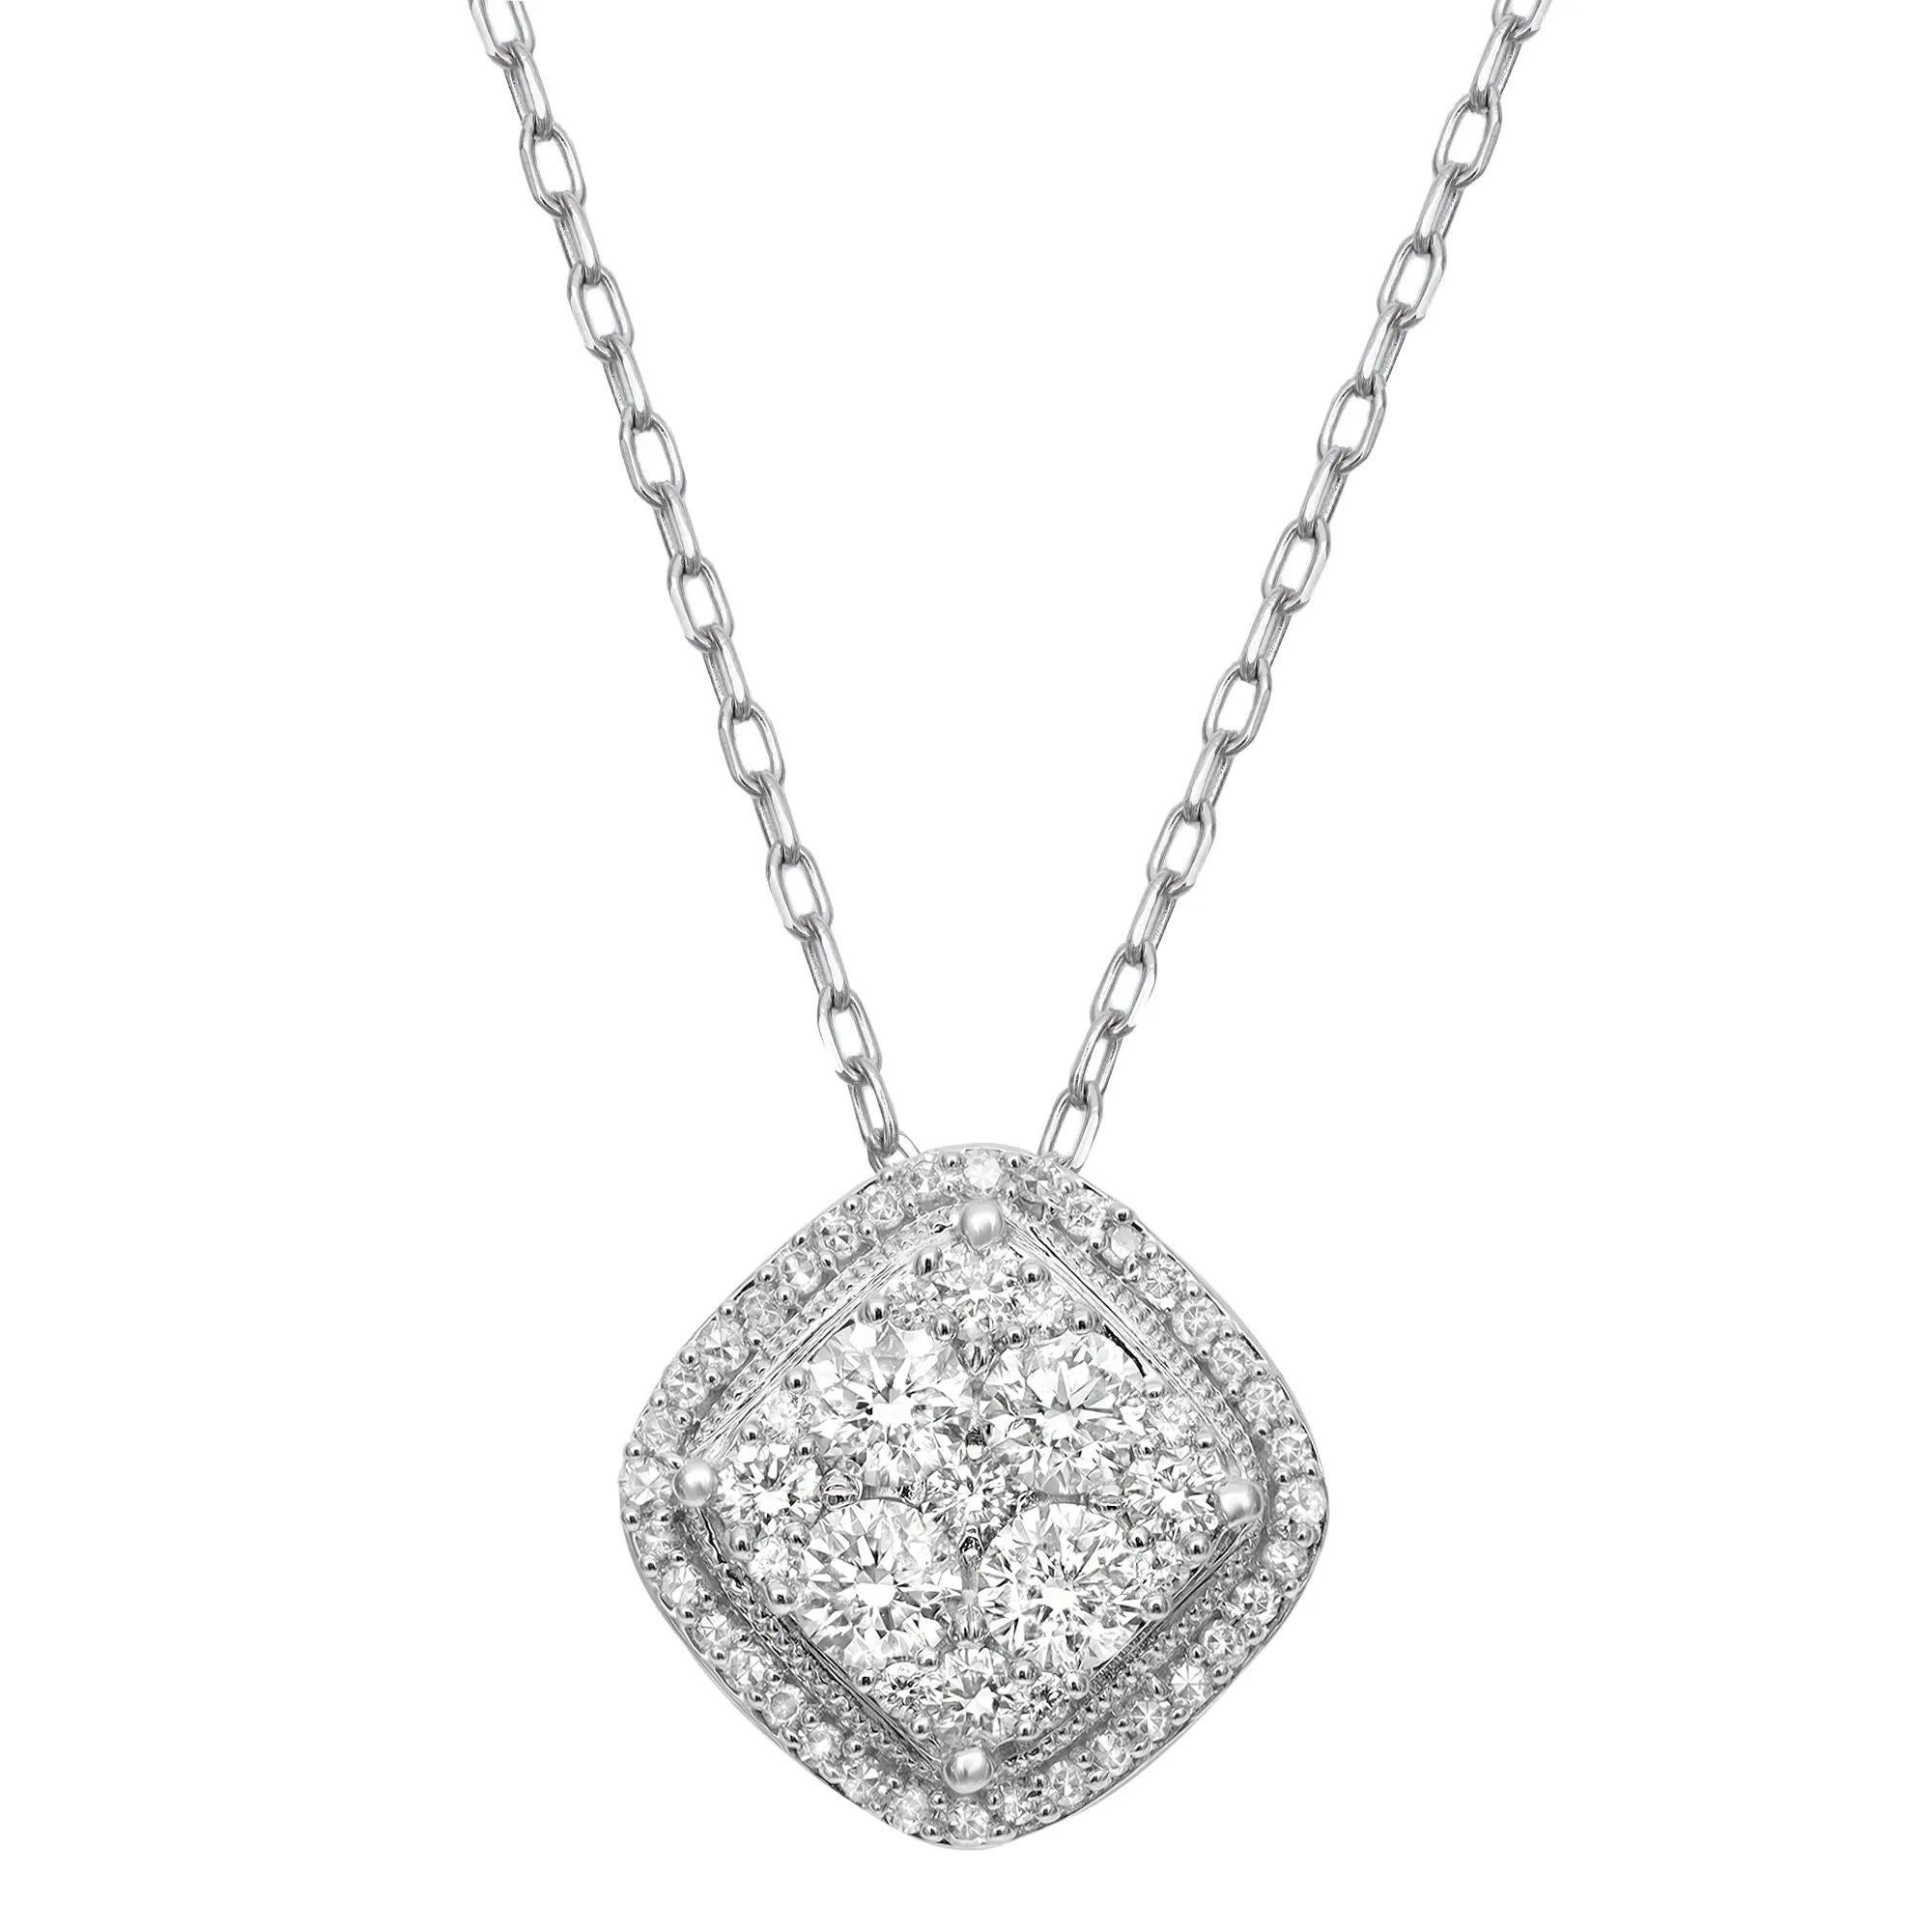 Fabulous and chic, this dazzling diamond pendant necklace is a standout addition to your every day and evening looks. This piece gives a touch of elegance to any ensemble you pair it with. Features round brilliant cut diamonds encrusted in a center